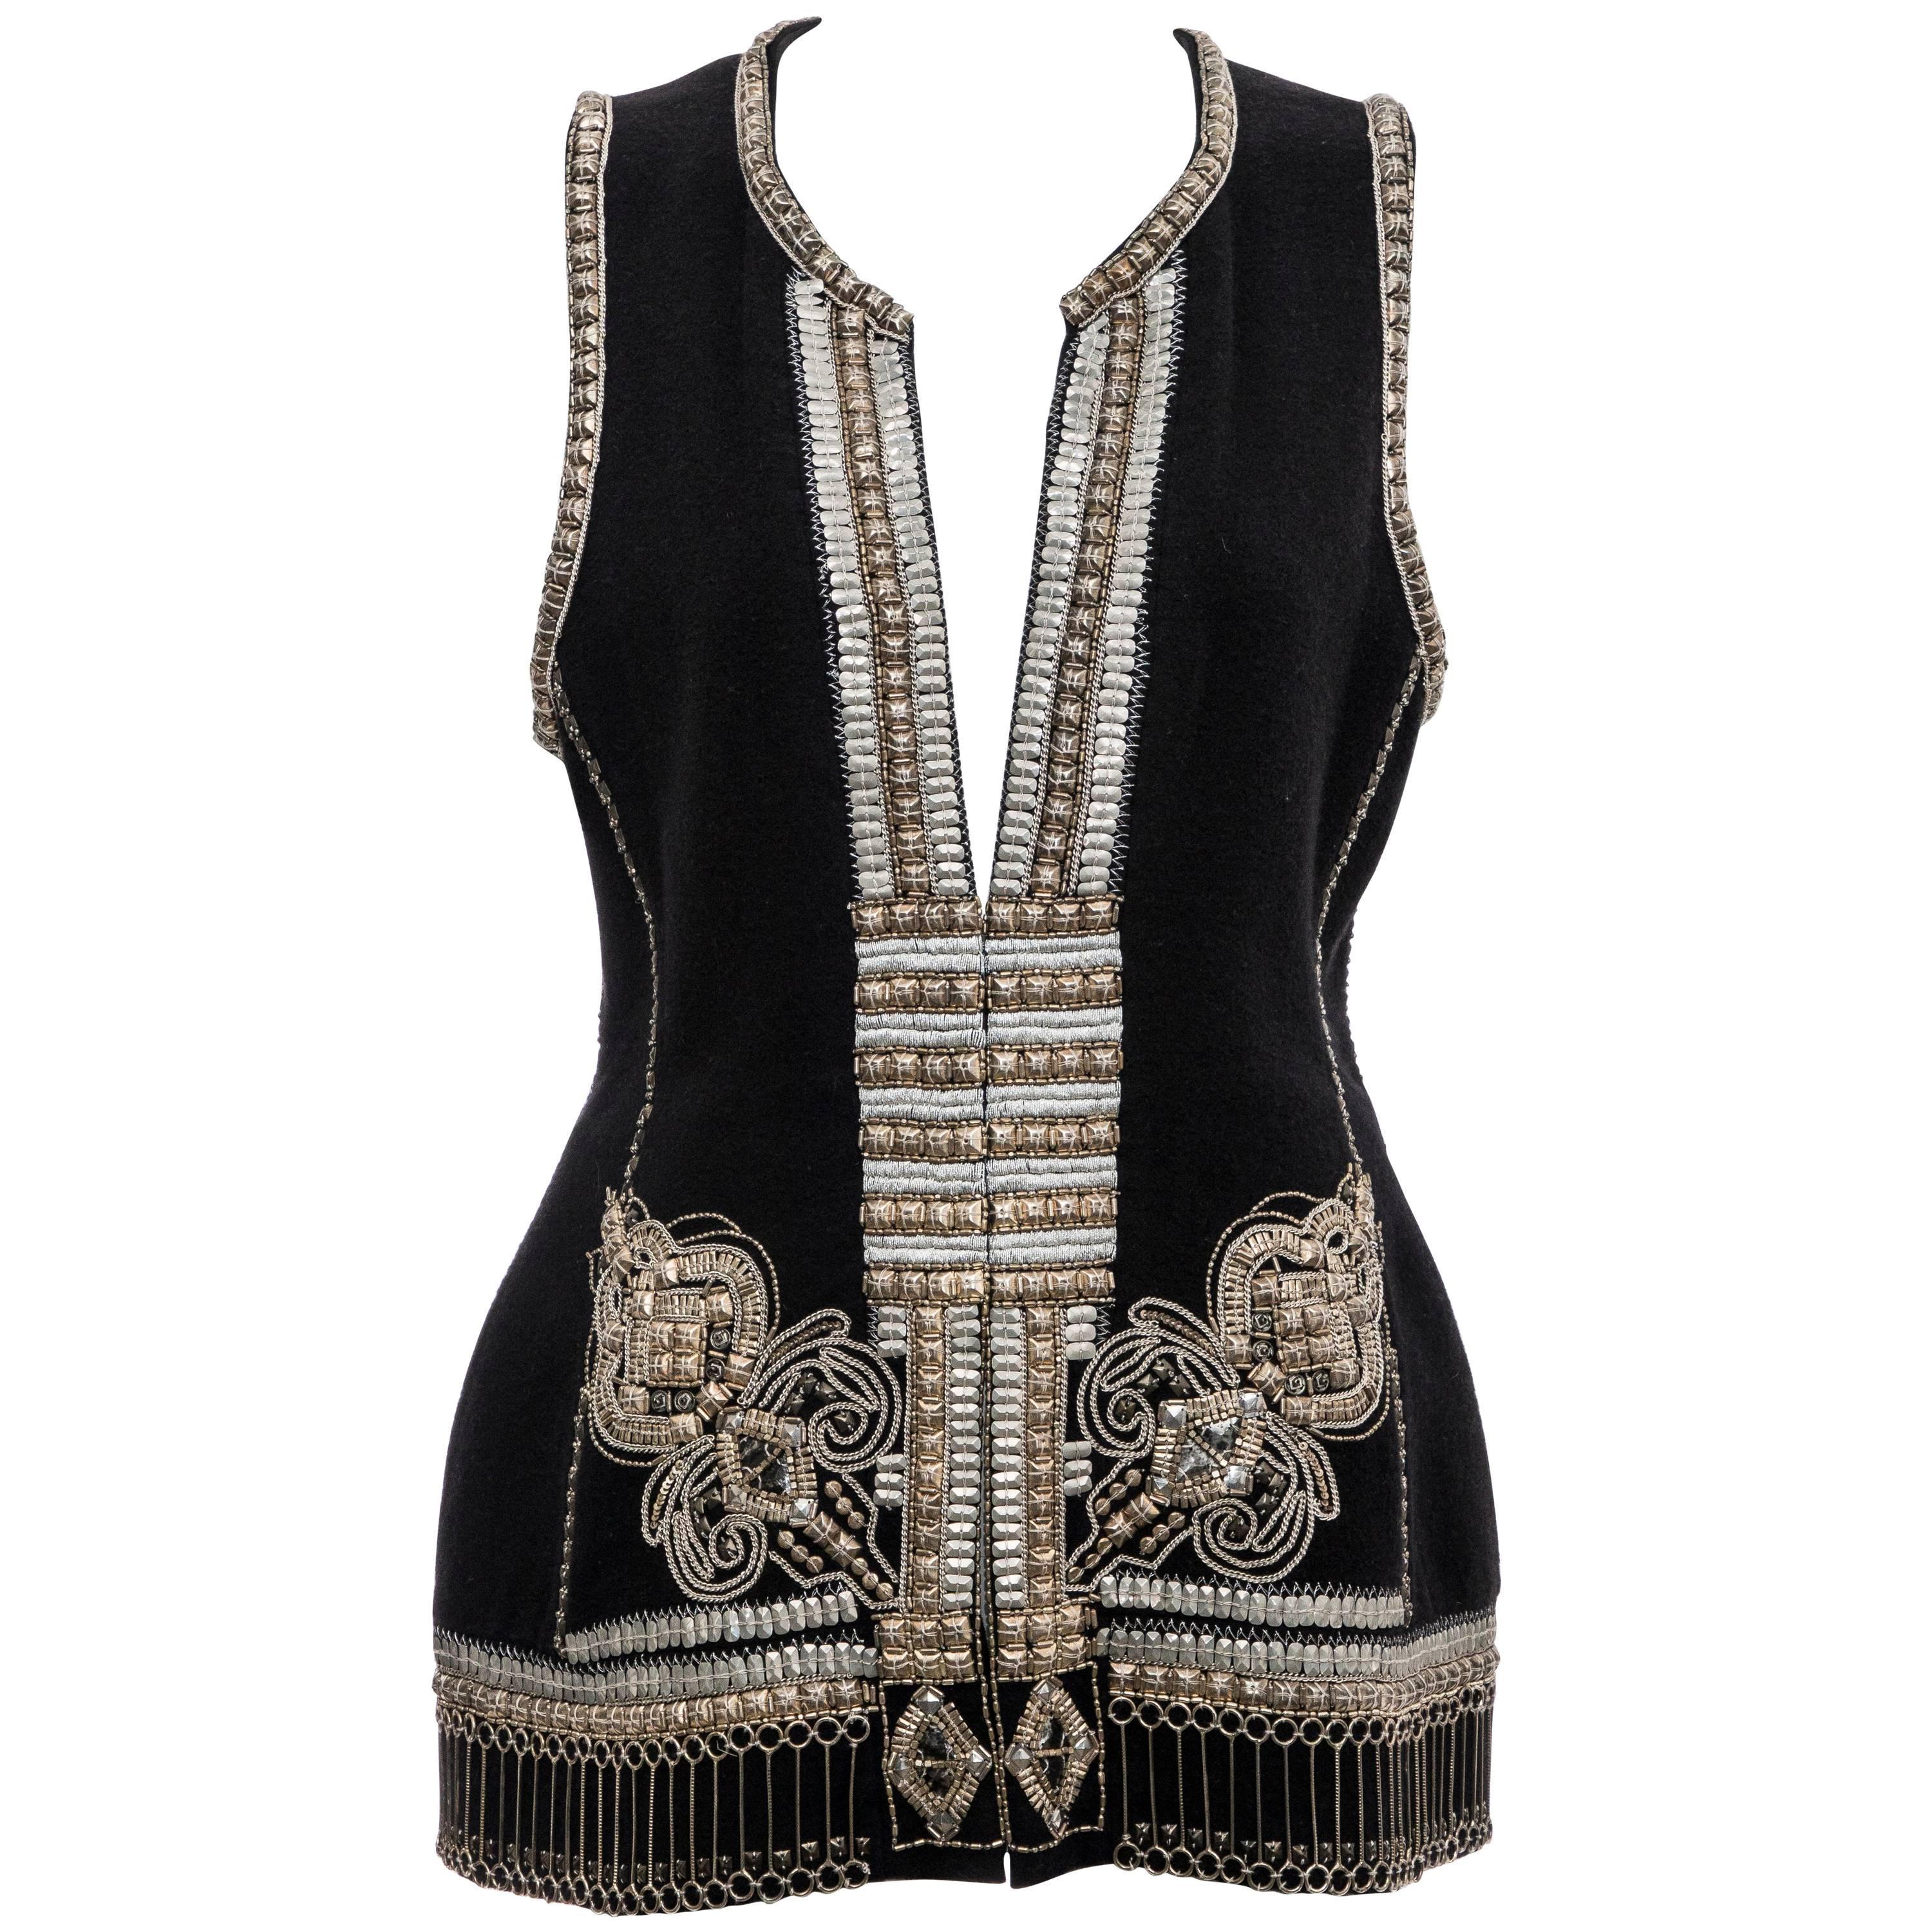 Dries Van Noten Black Wool Cashmere Silver Indian Embroidered Vest, Fall 2010